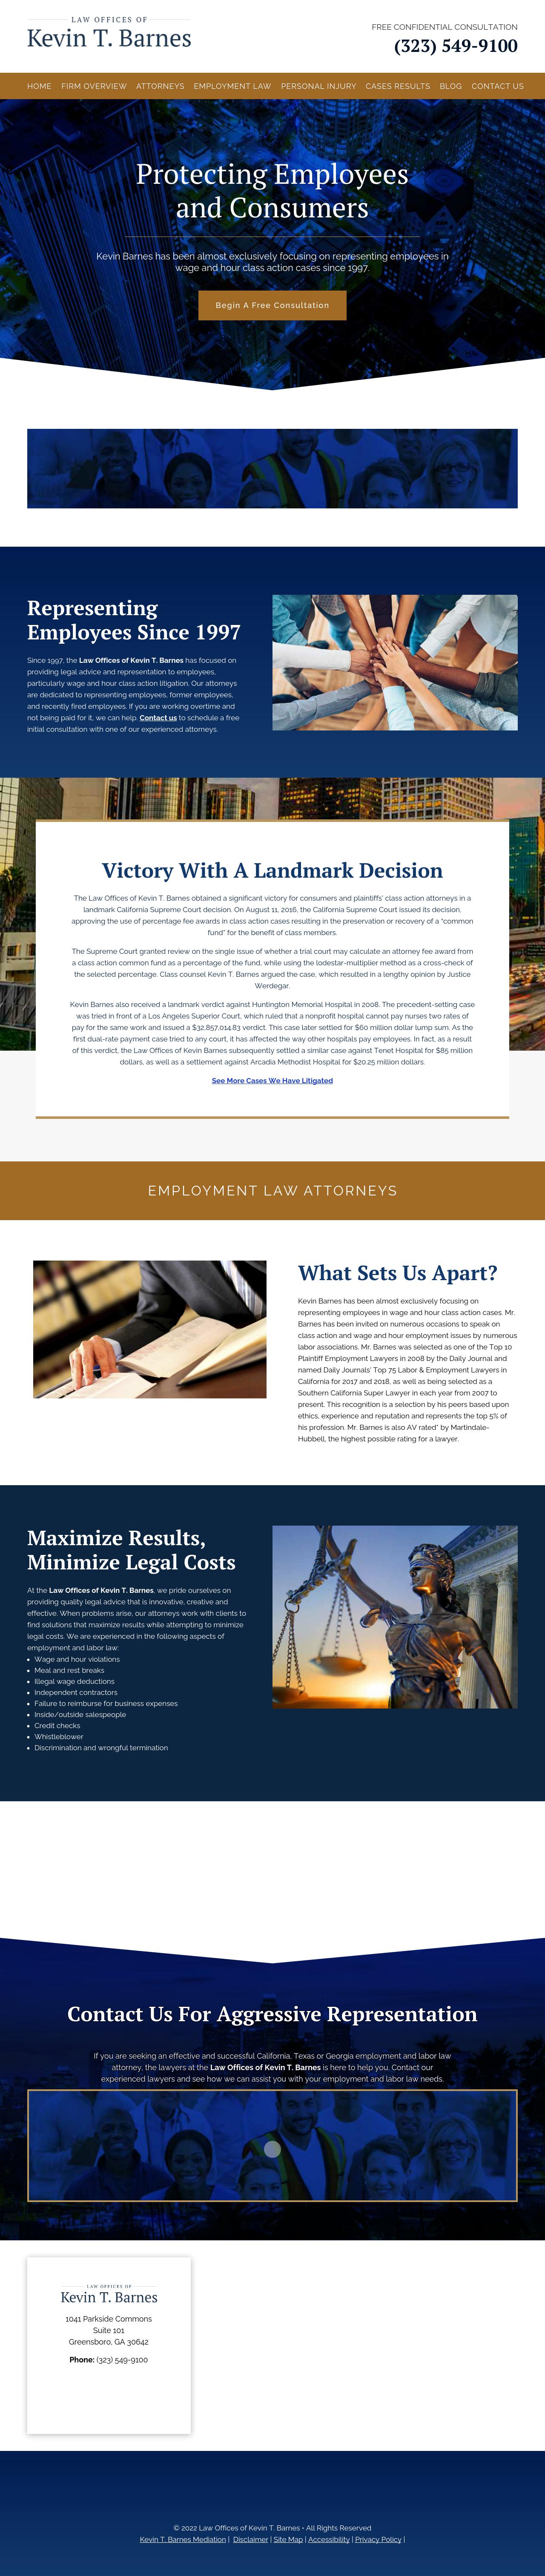 Law Offices of Kevin T. Barnes - Los Angeles CA Lawyers